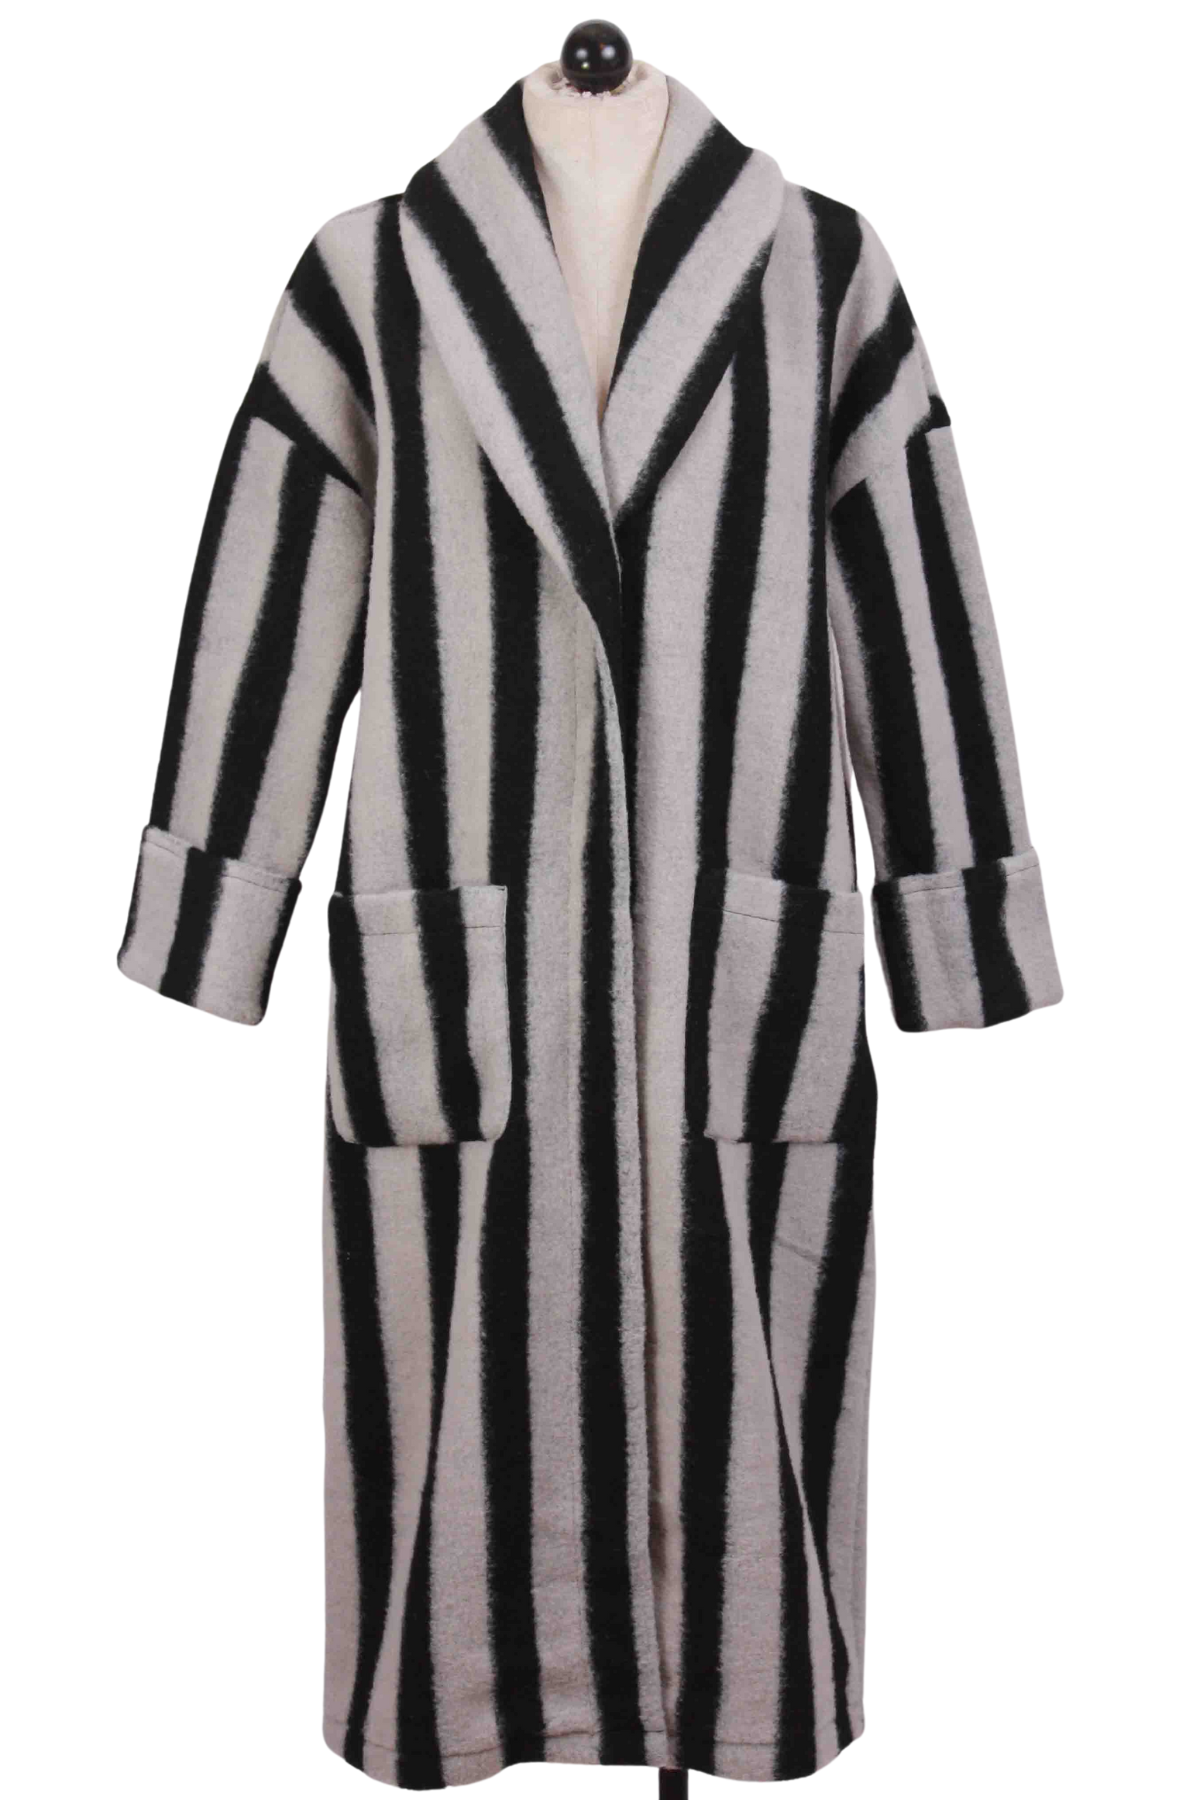 Sand and Black Earn Stripes Car Coat by Liv by Habitat